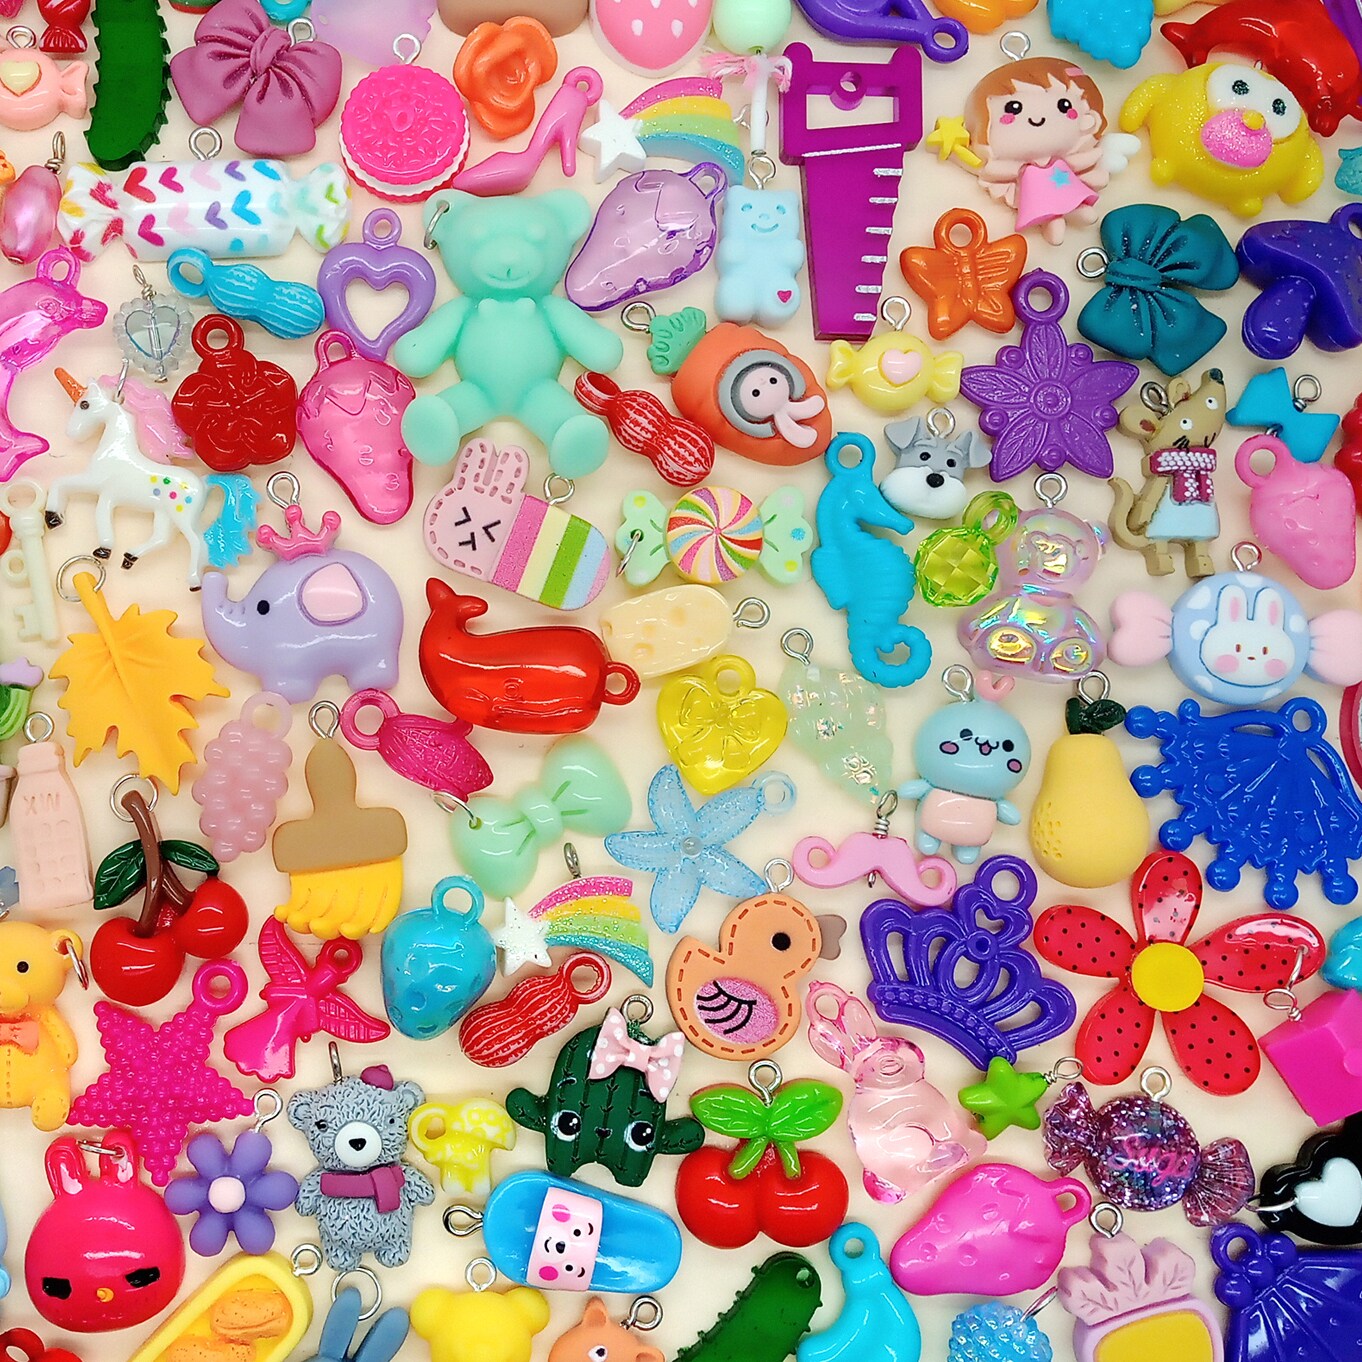 100 Charms Mix, Huge Variety of Assorted Acrylic Resin & Other Cute Charms,  Adorabilities